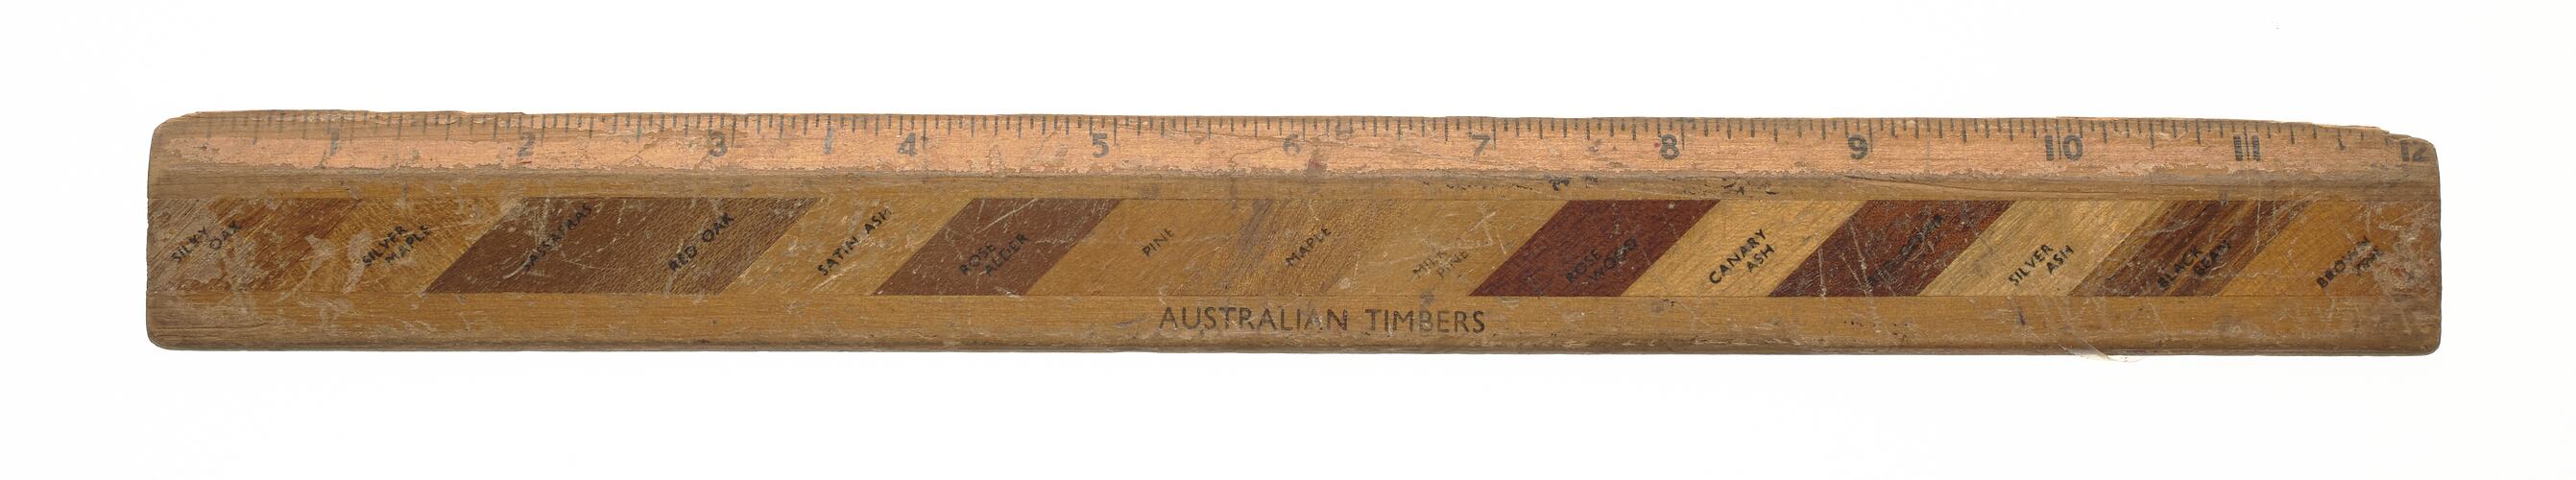 Wooden ruler with strips of different identified Australian timbers along length.